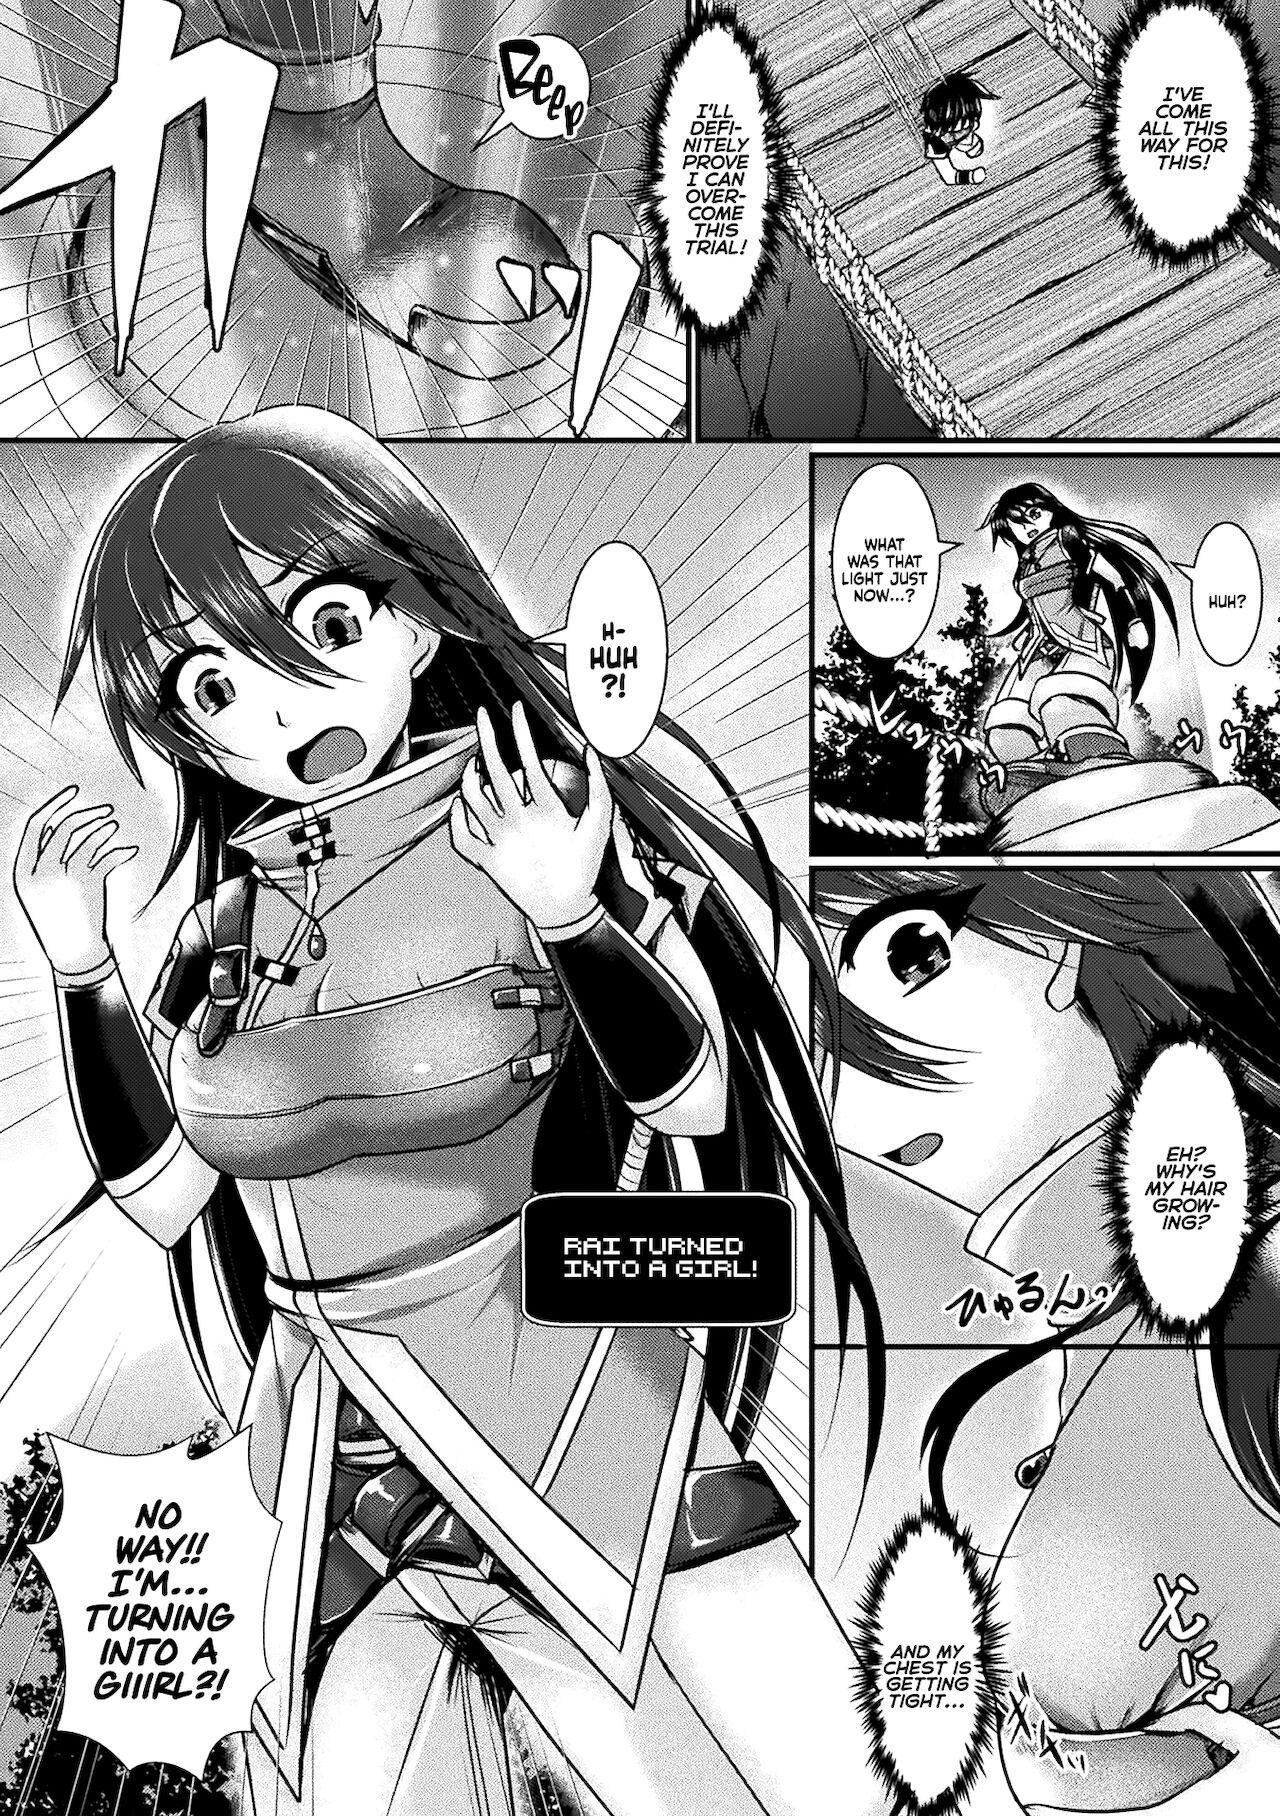 Roundass The Final Trial - Ero trap dungeon Marido - Page 2